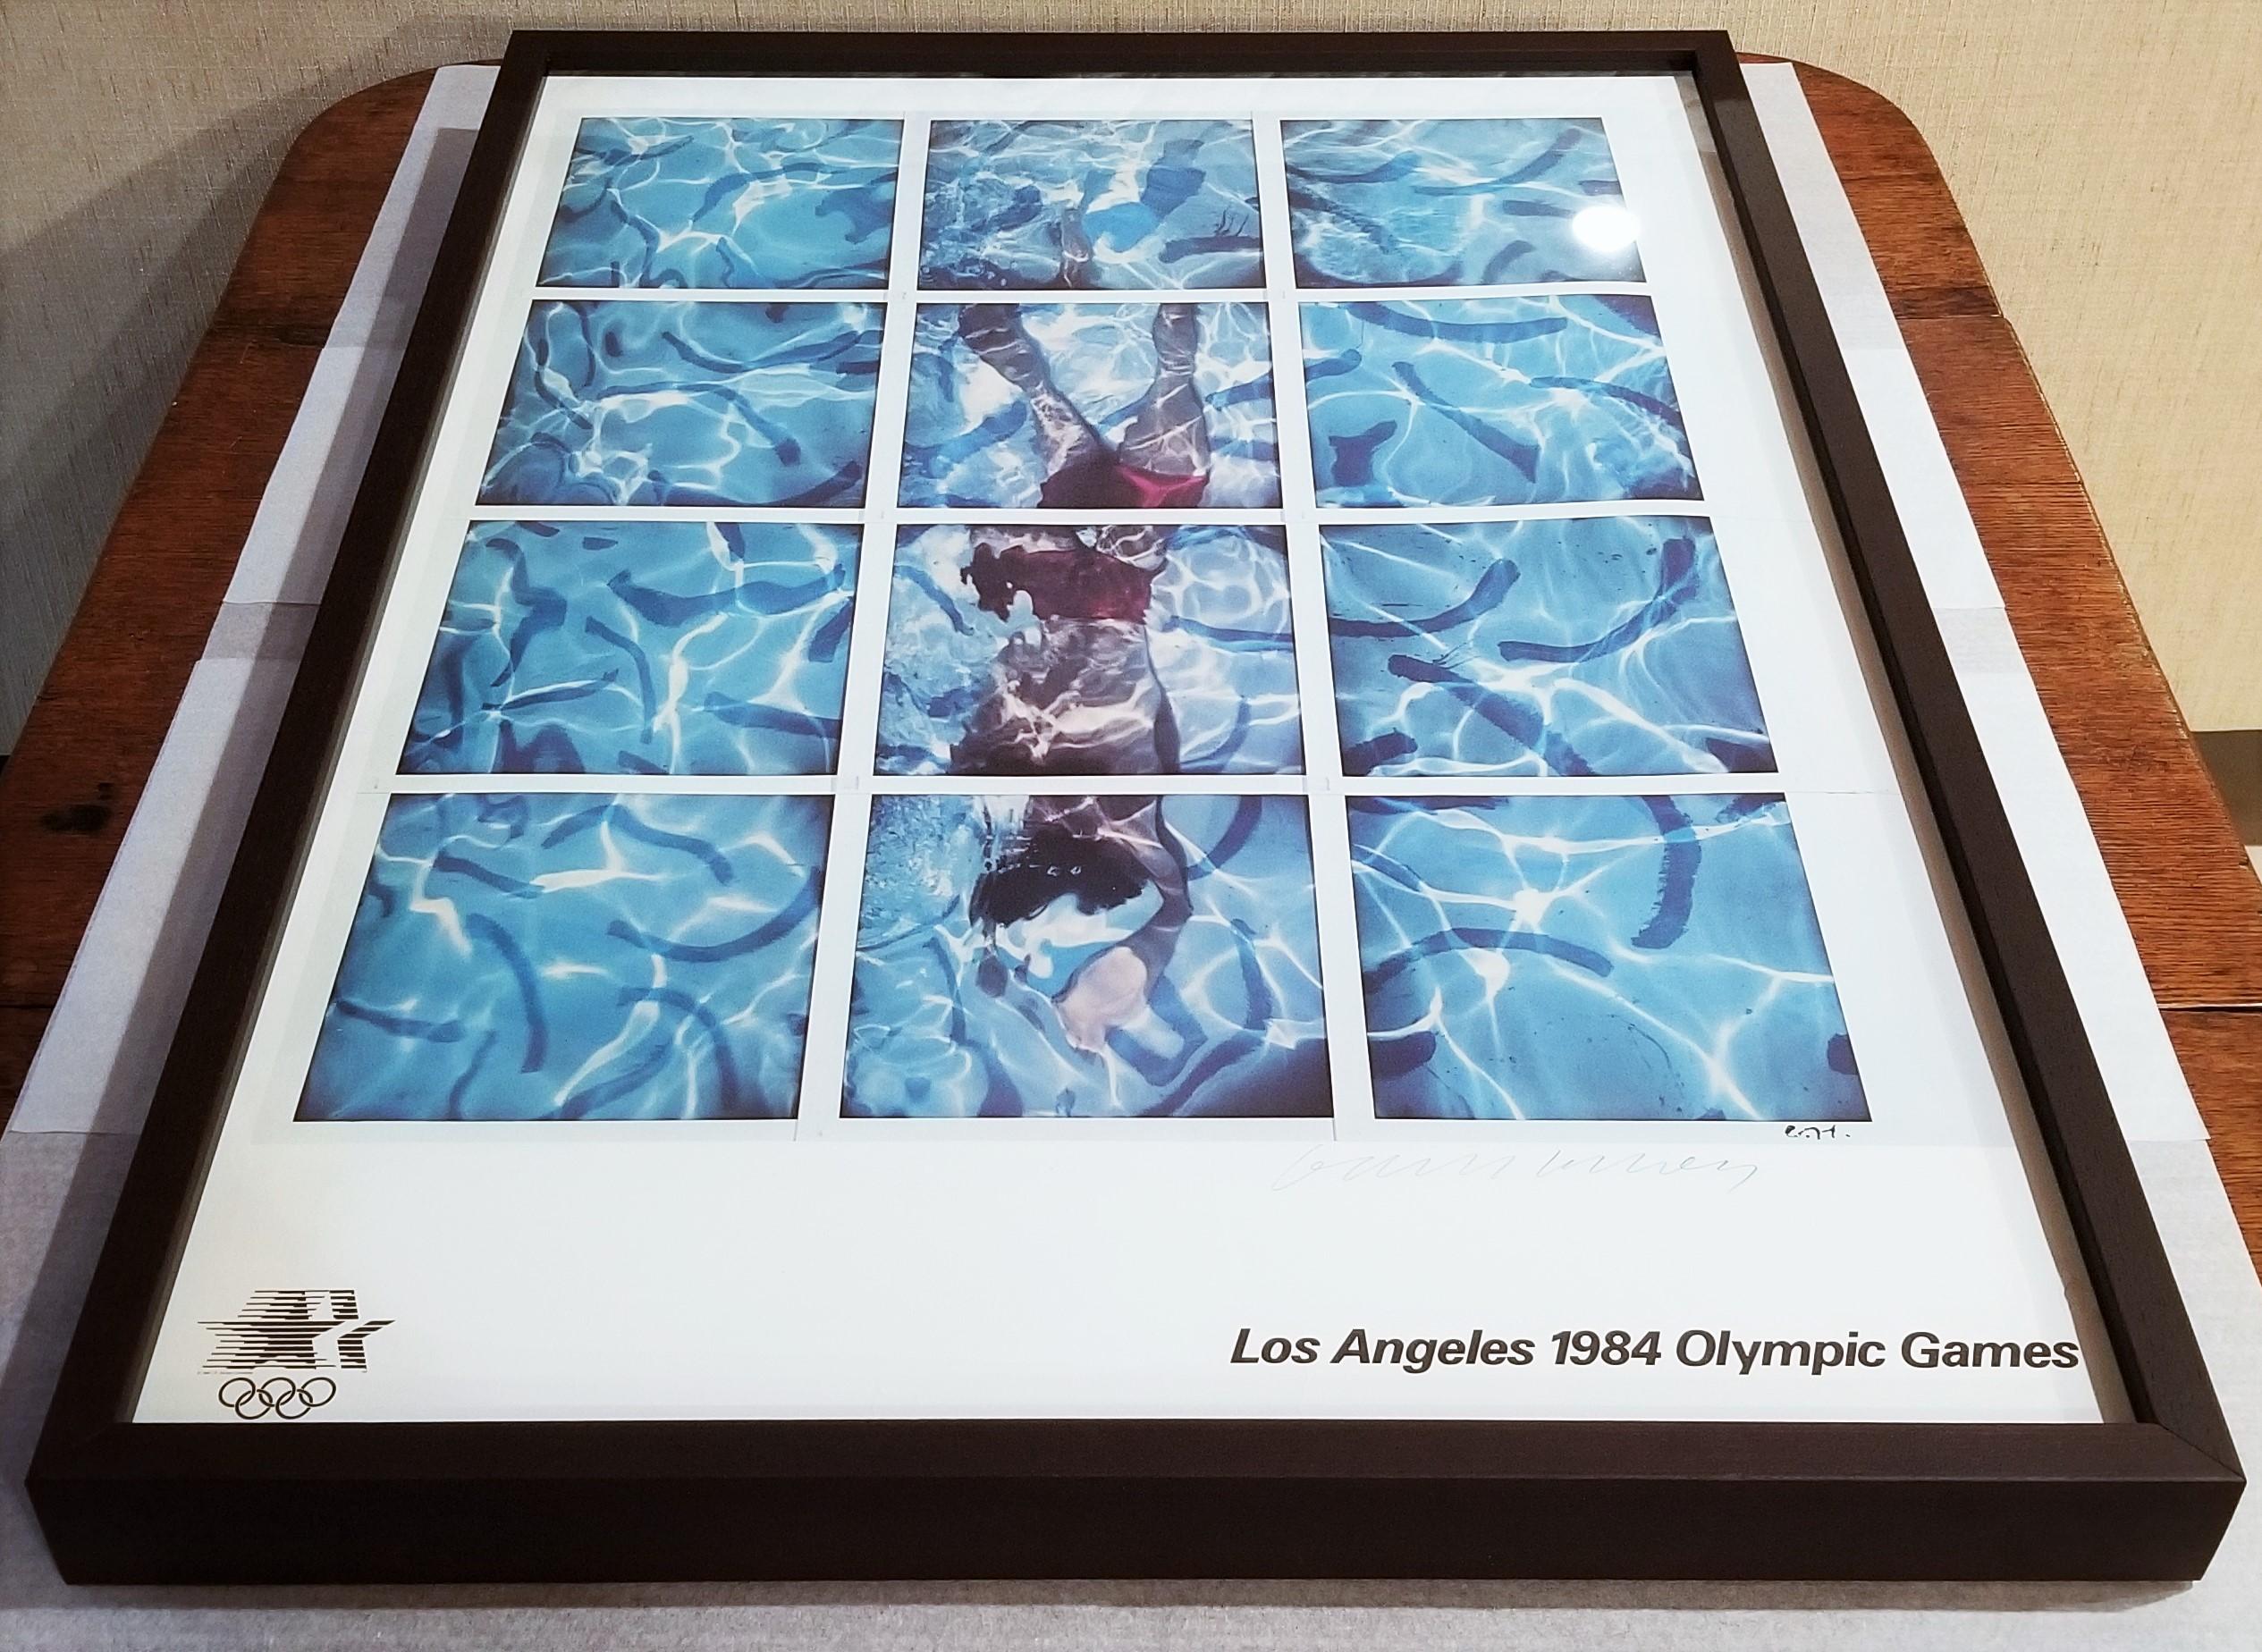 Los Angeles 1984 Olympic Games (Polaroids of Swimmer) Poster (Signed) 9